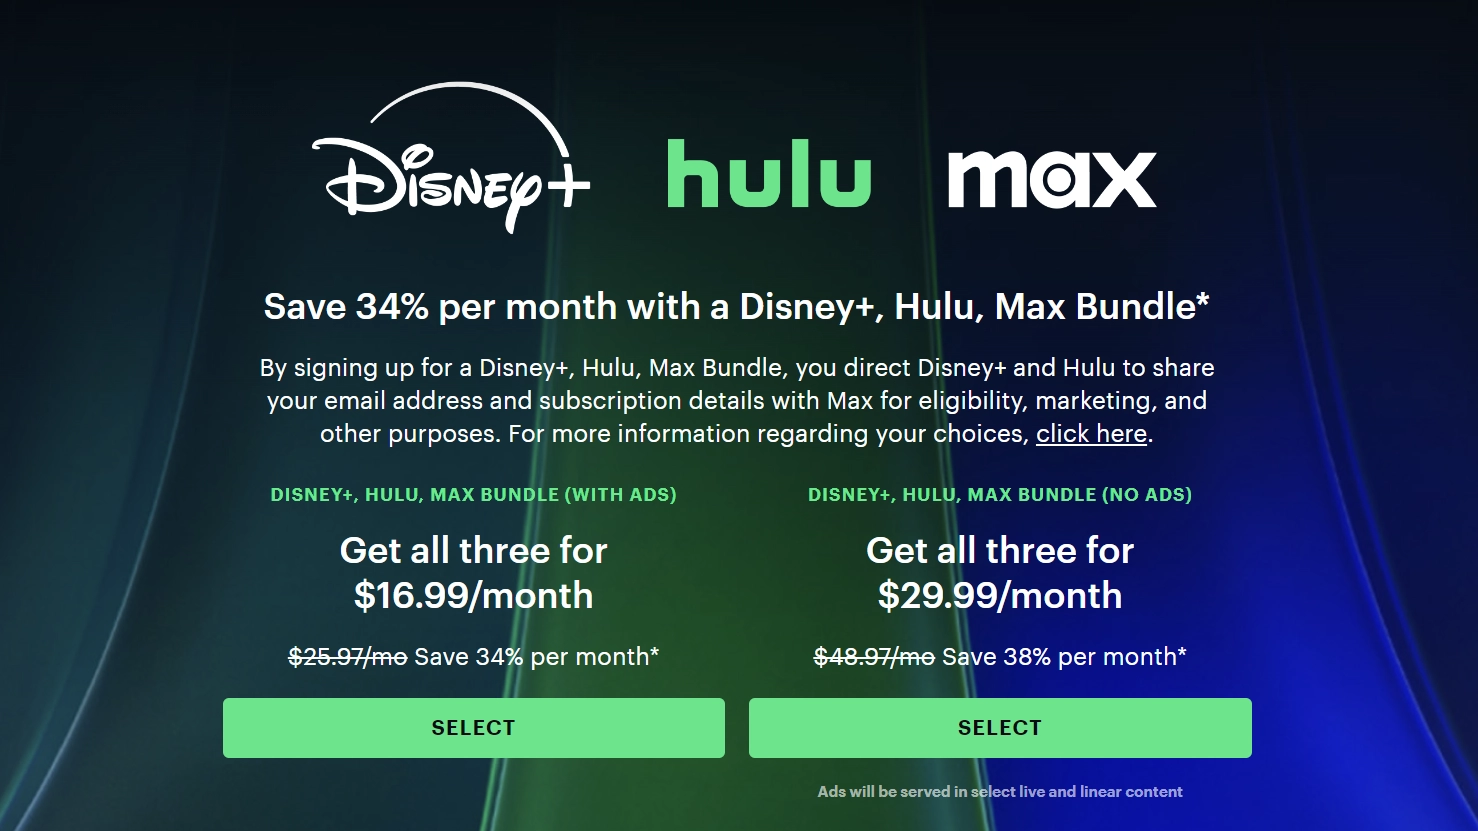 New Bundle Combines Disney+, HBO Max, and Hulu, Starting at $16.99 Per Month